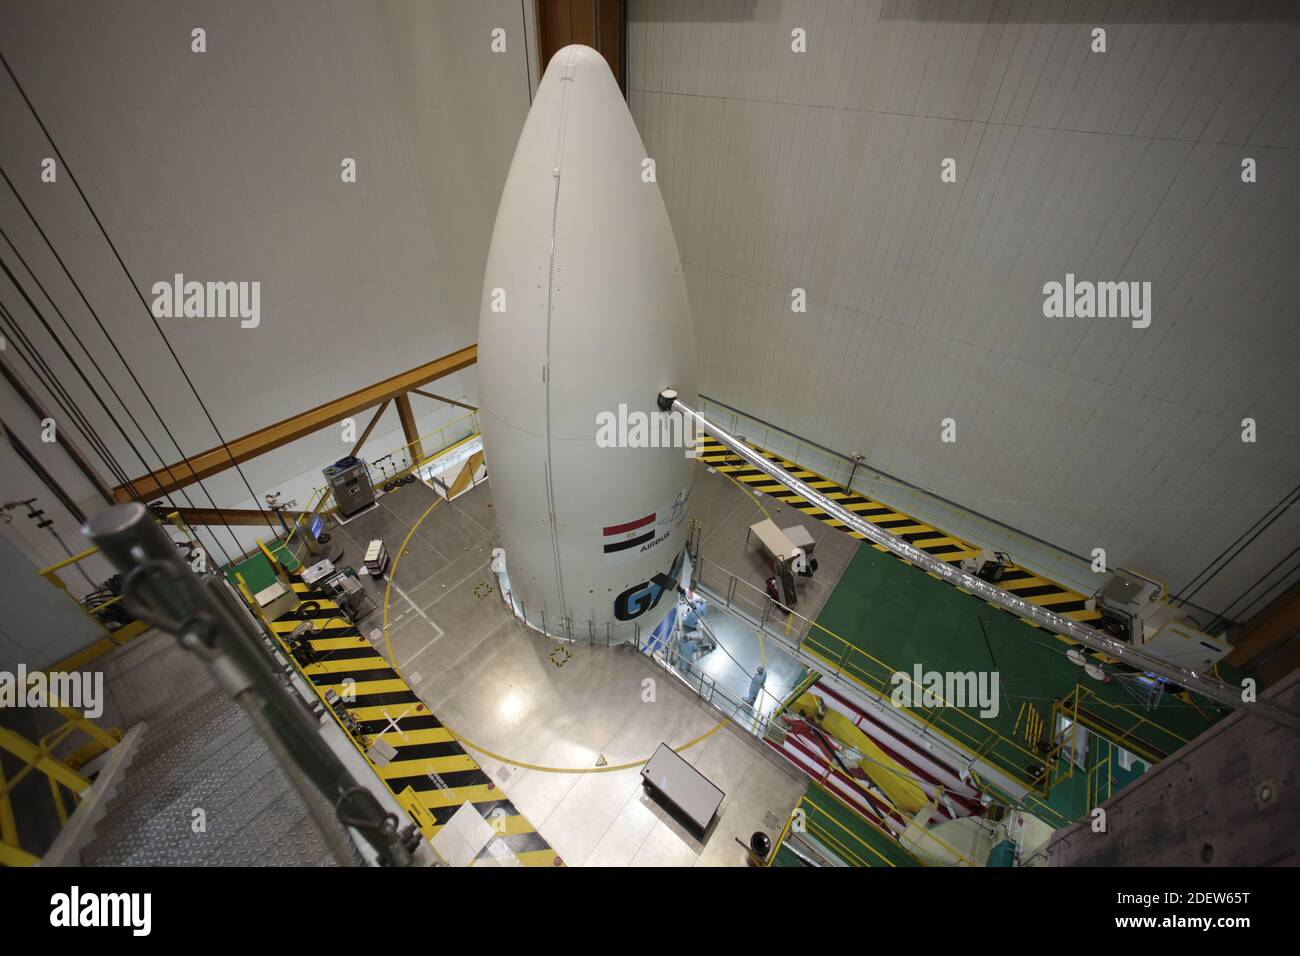 Kourou,Guyane, France on November 26,2019.The 250 launch with a Ariane 5.  With the 250 launch of Ariane launcher family,this year 2020 Arianespace  celebrates its 40th anniversary. Since 1980 Arianespace conducting a  combined